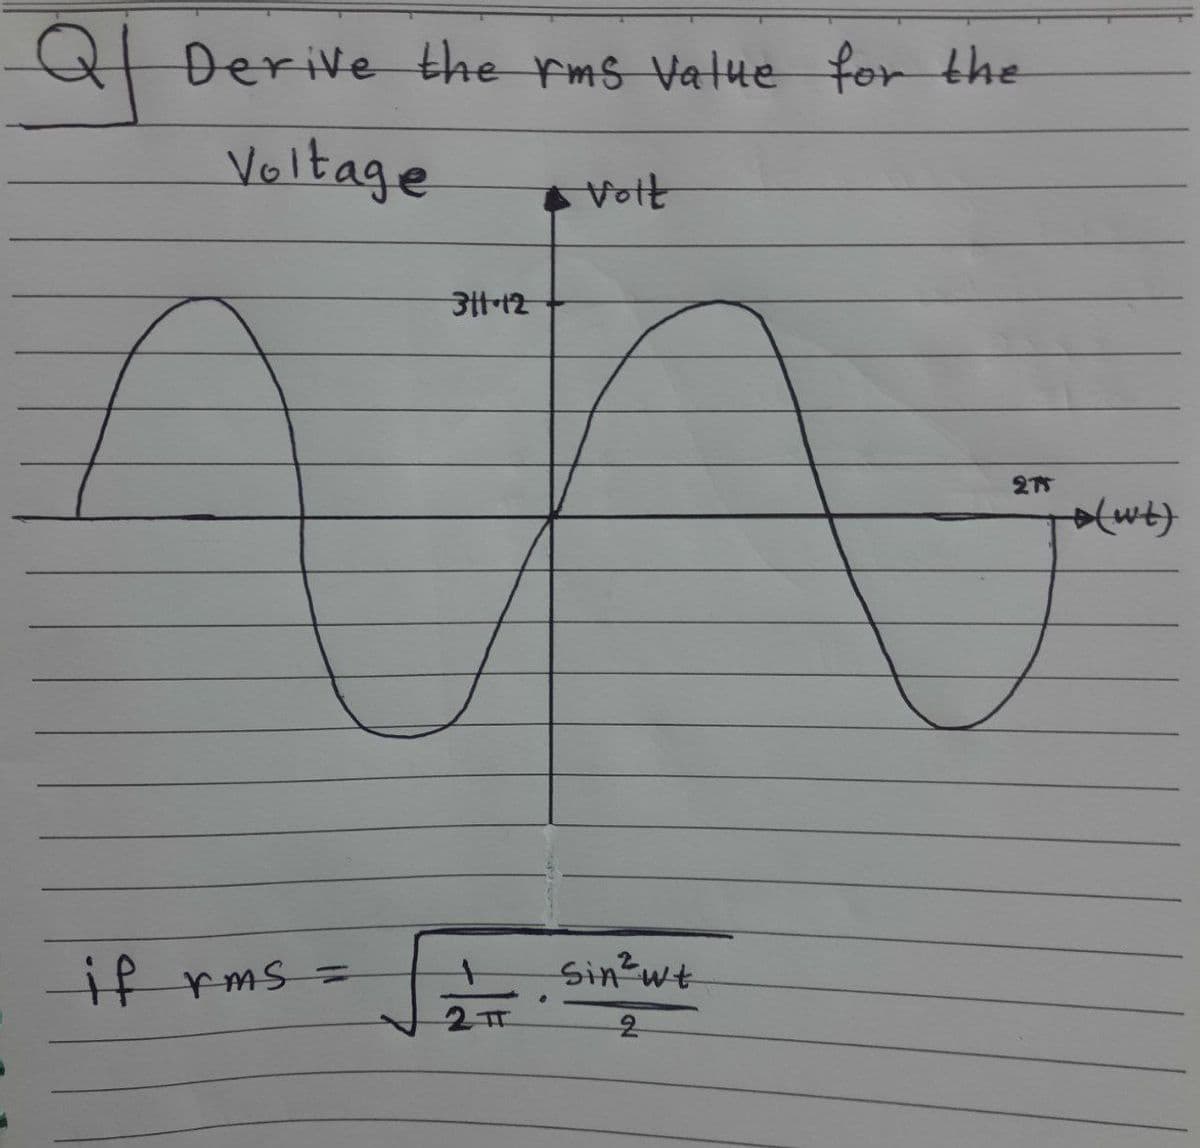 Derive the rms value for the
Voltage
fo
if rms =
311-12
2π
Vott
Sin ² wt
2
275